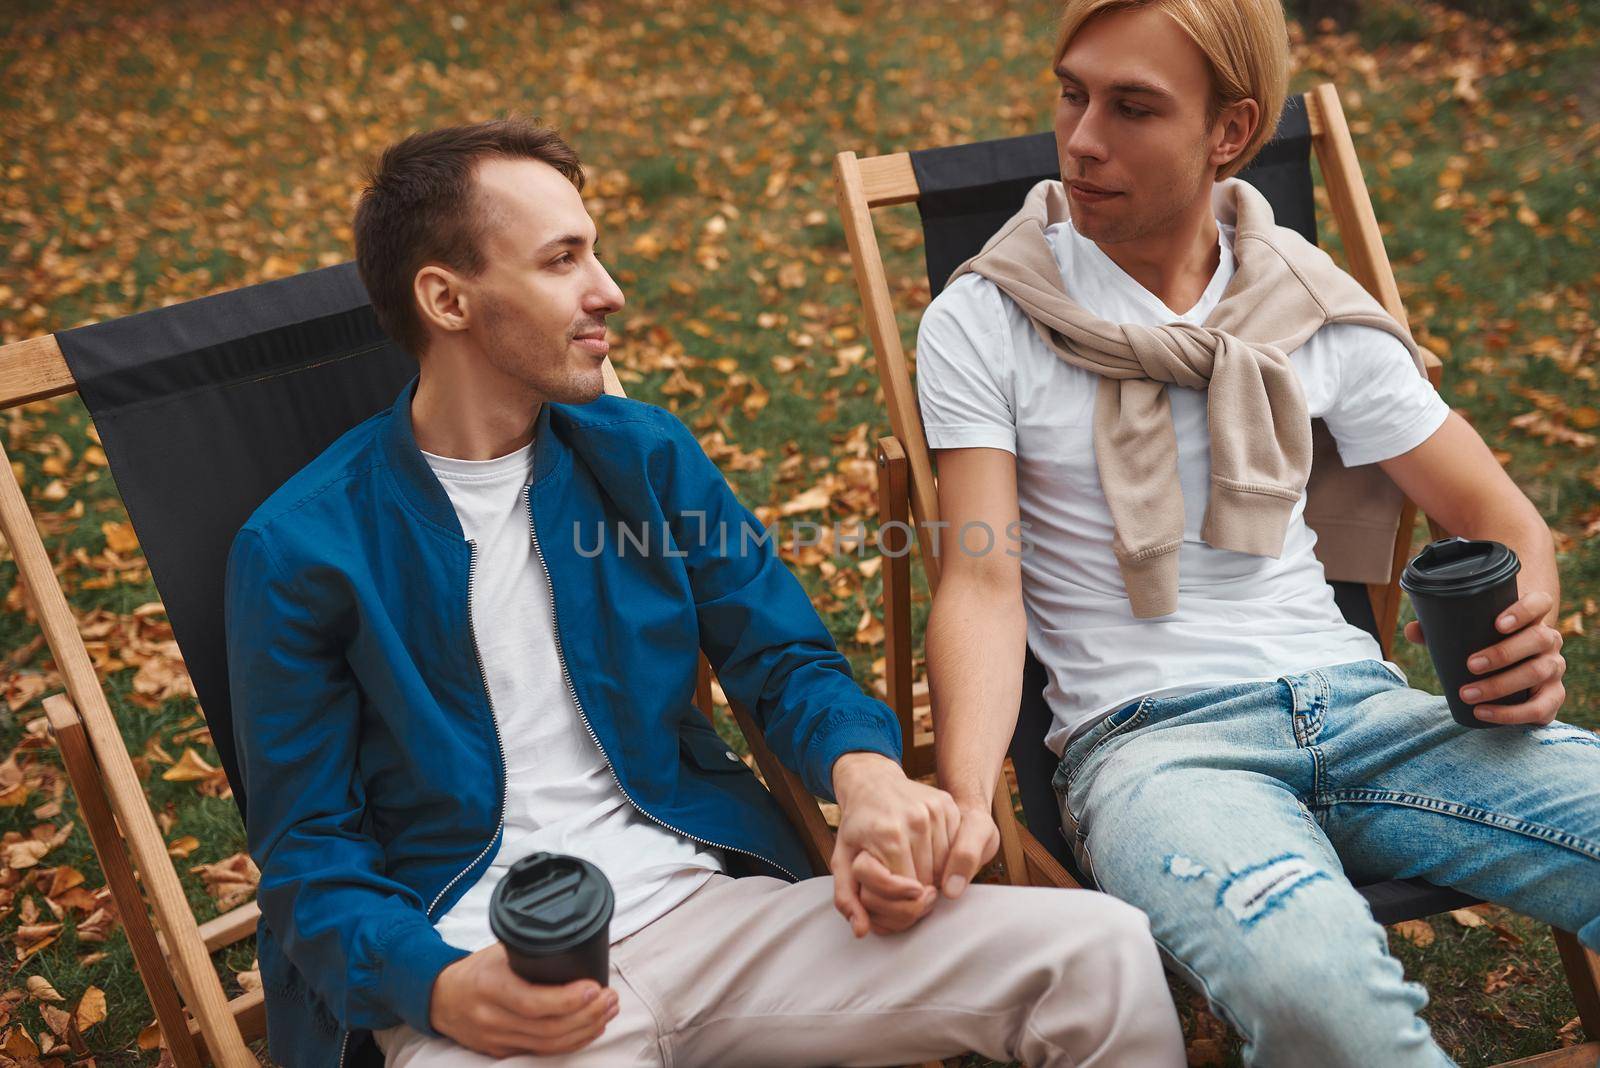 Loving gay couple sitting outdoors together and holding hands while drinking coffee. Two handsome men having romantic date in park. LGBT concept.